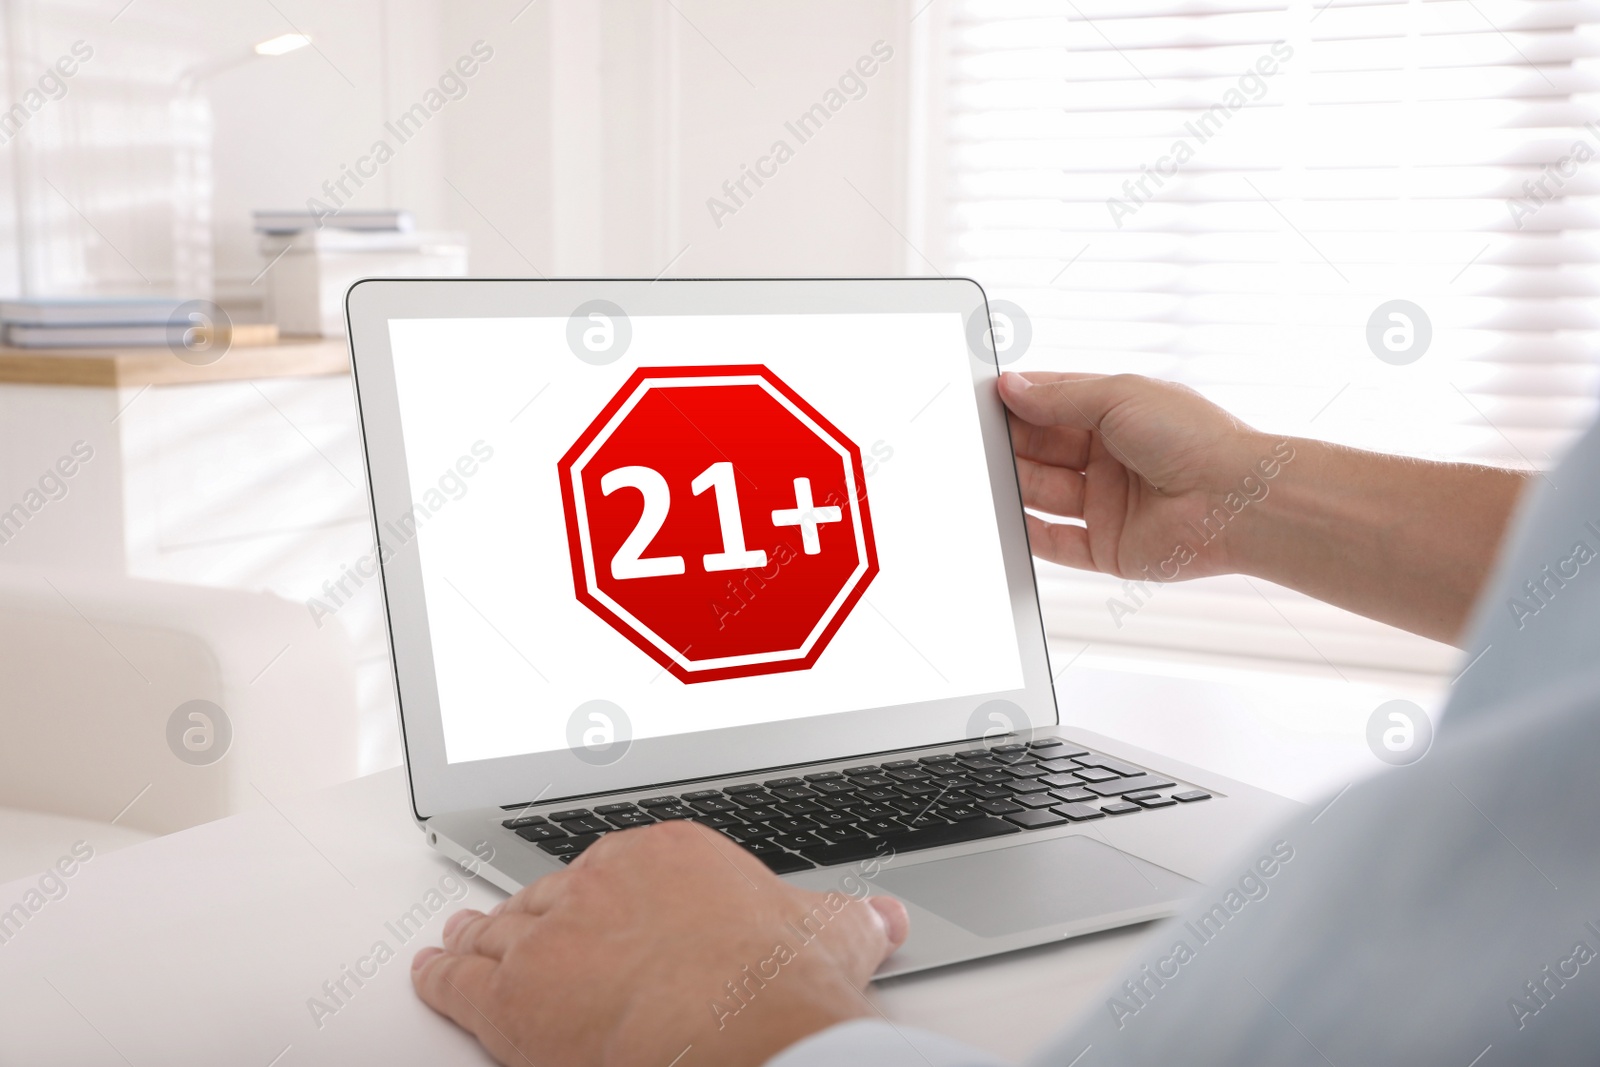 Image of Man using laptop with age limit sign 21+ years indoors, closeup